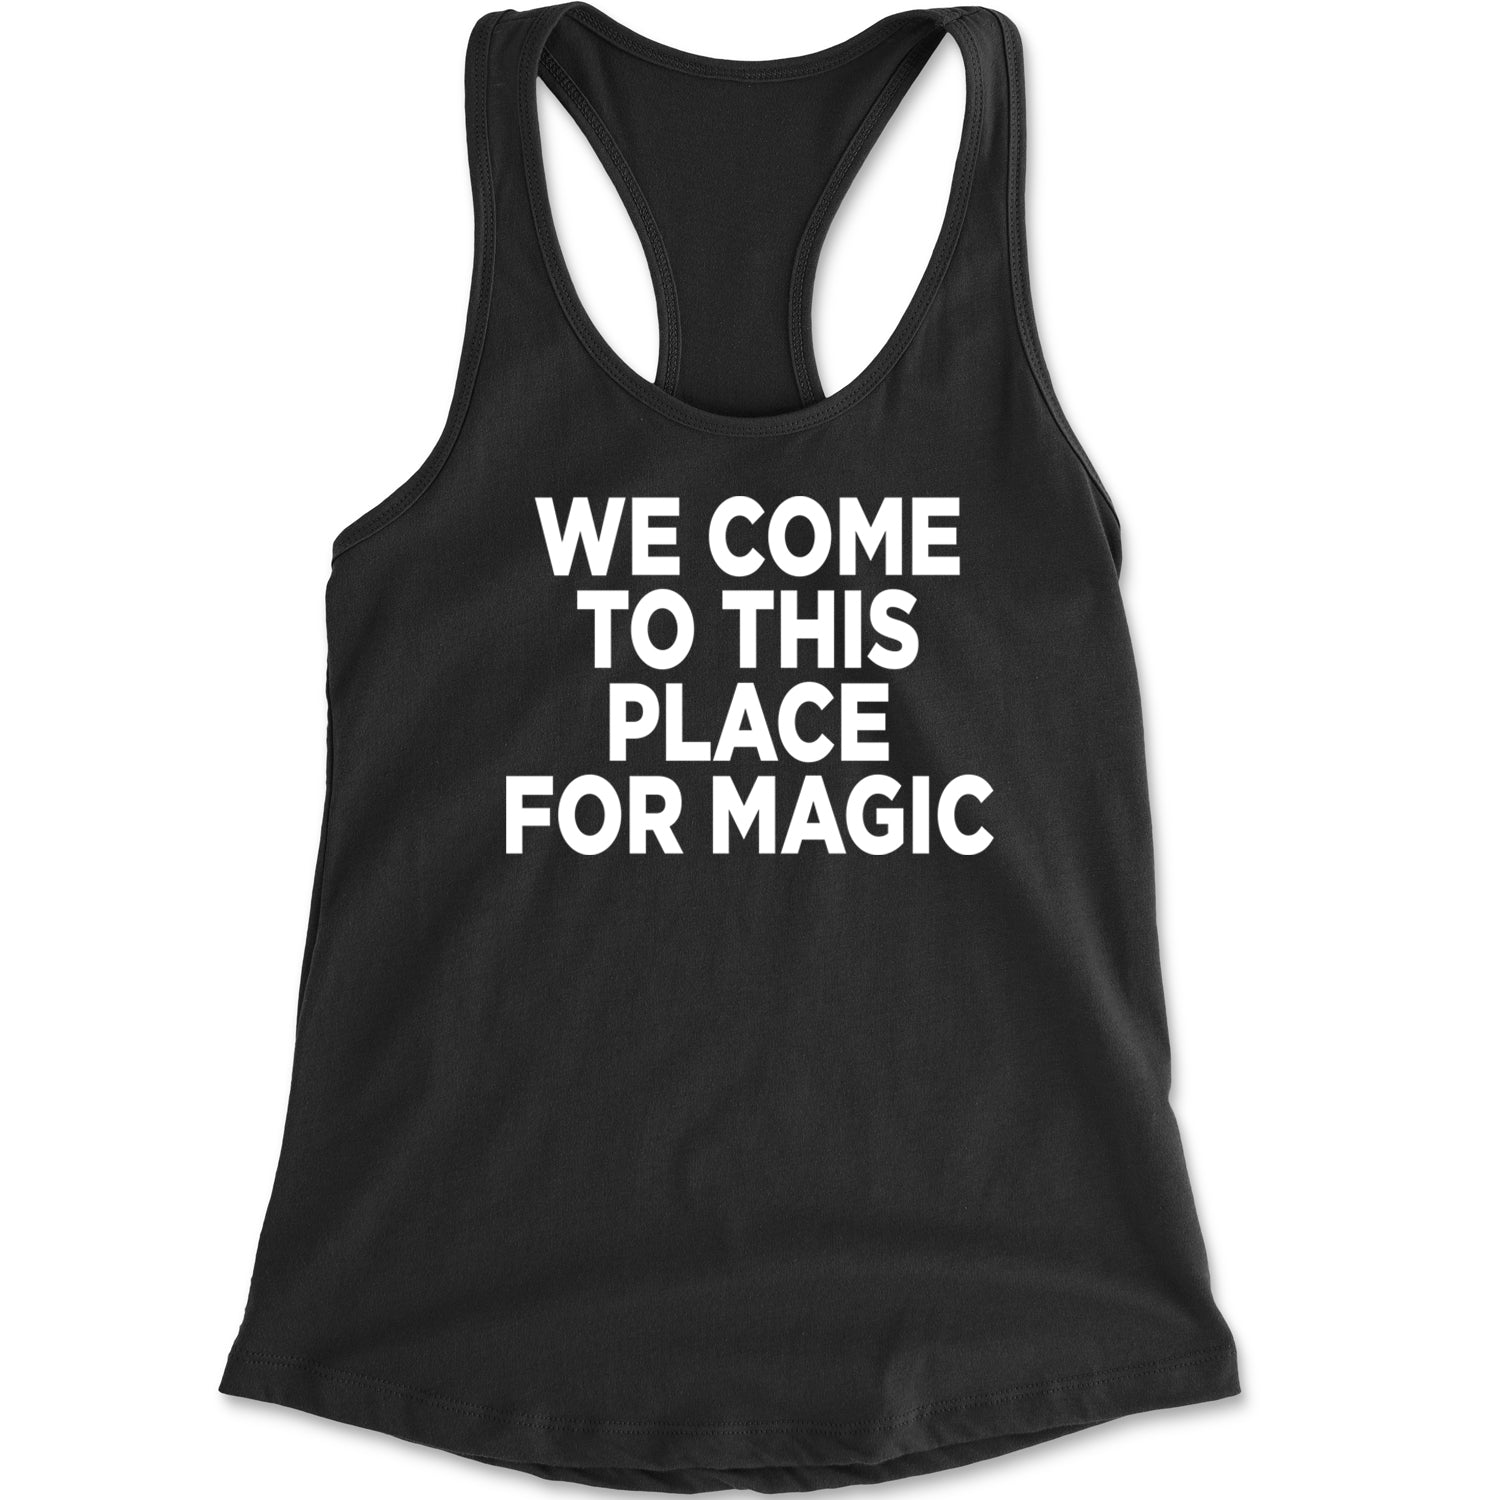 We Come To This Place For Magic Guts Racerback Tank Top for Women